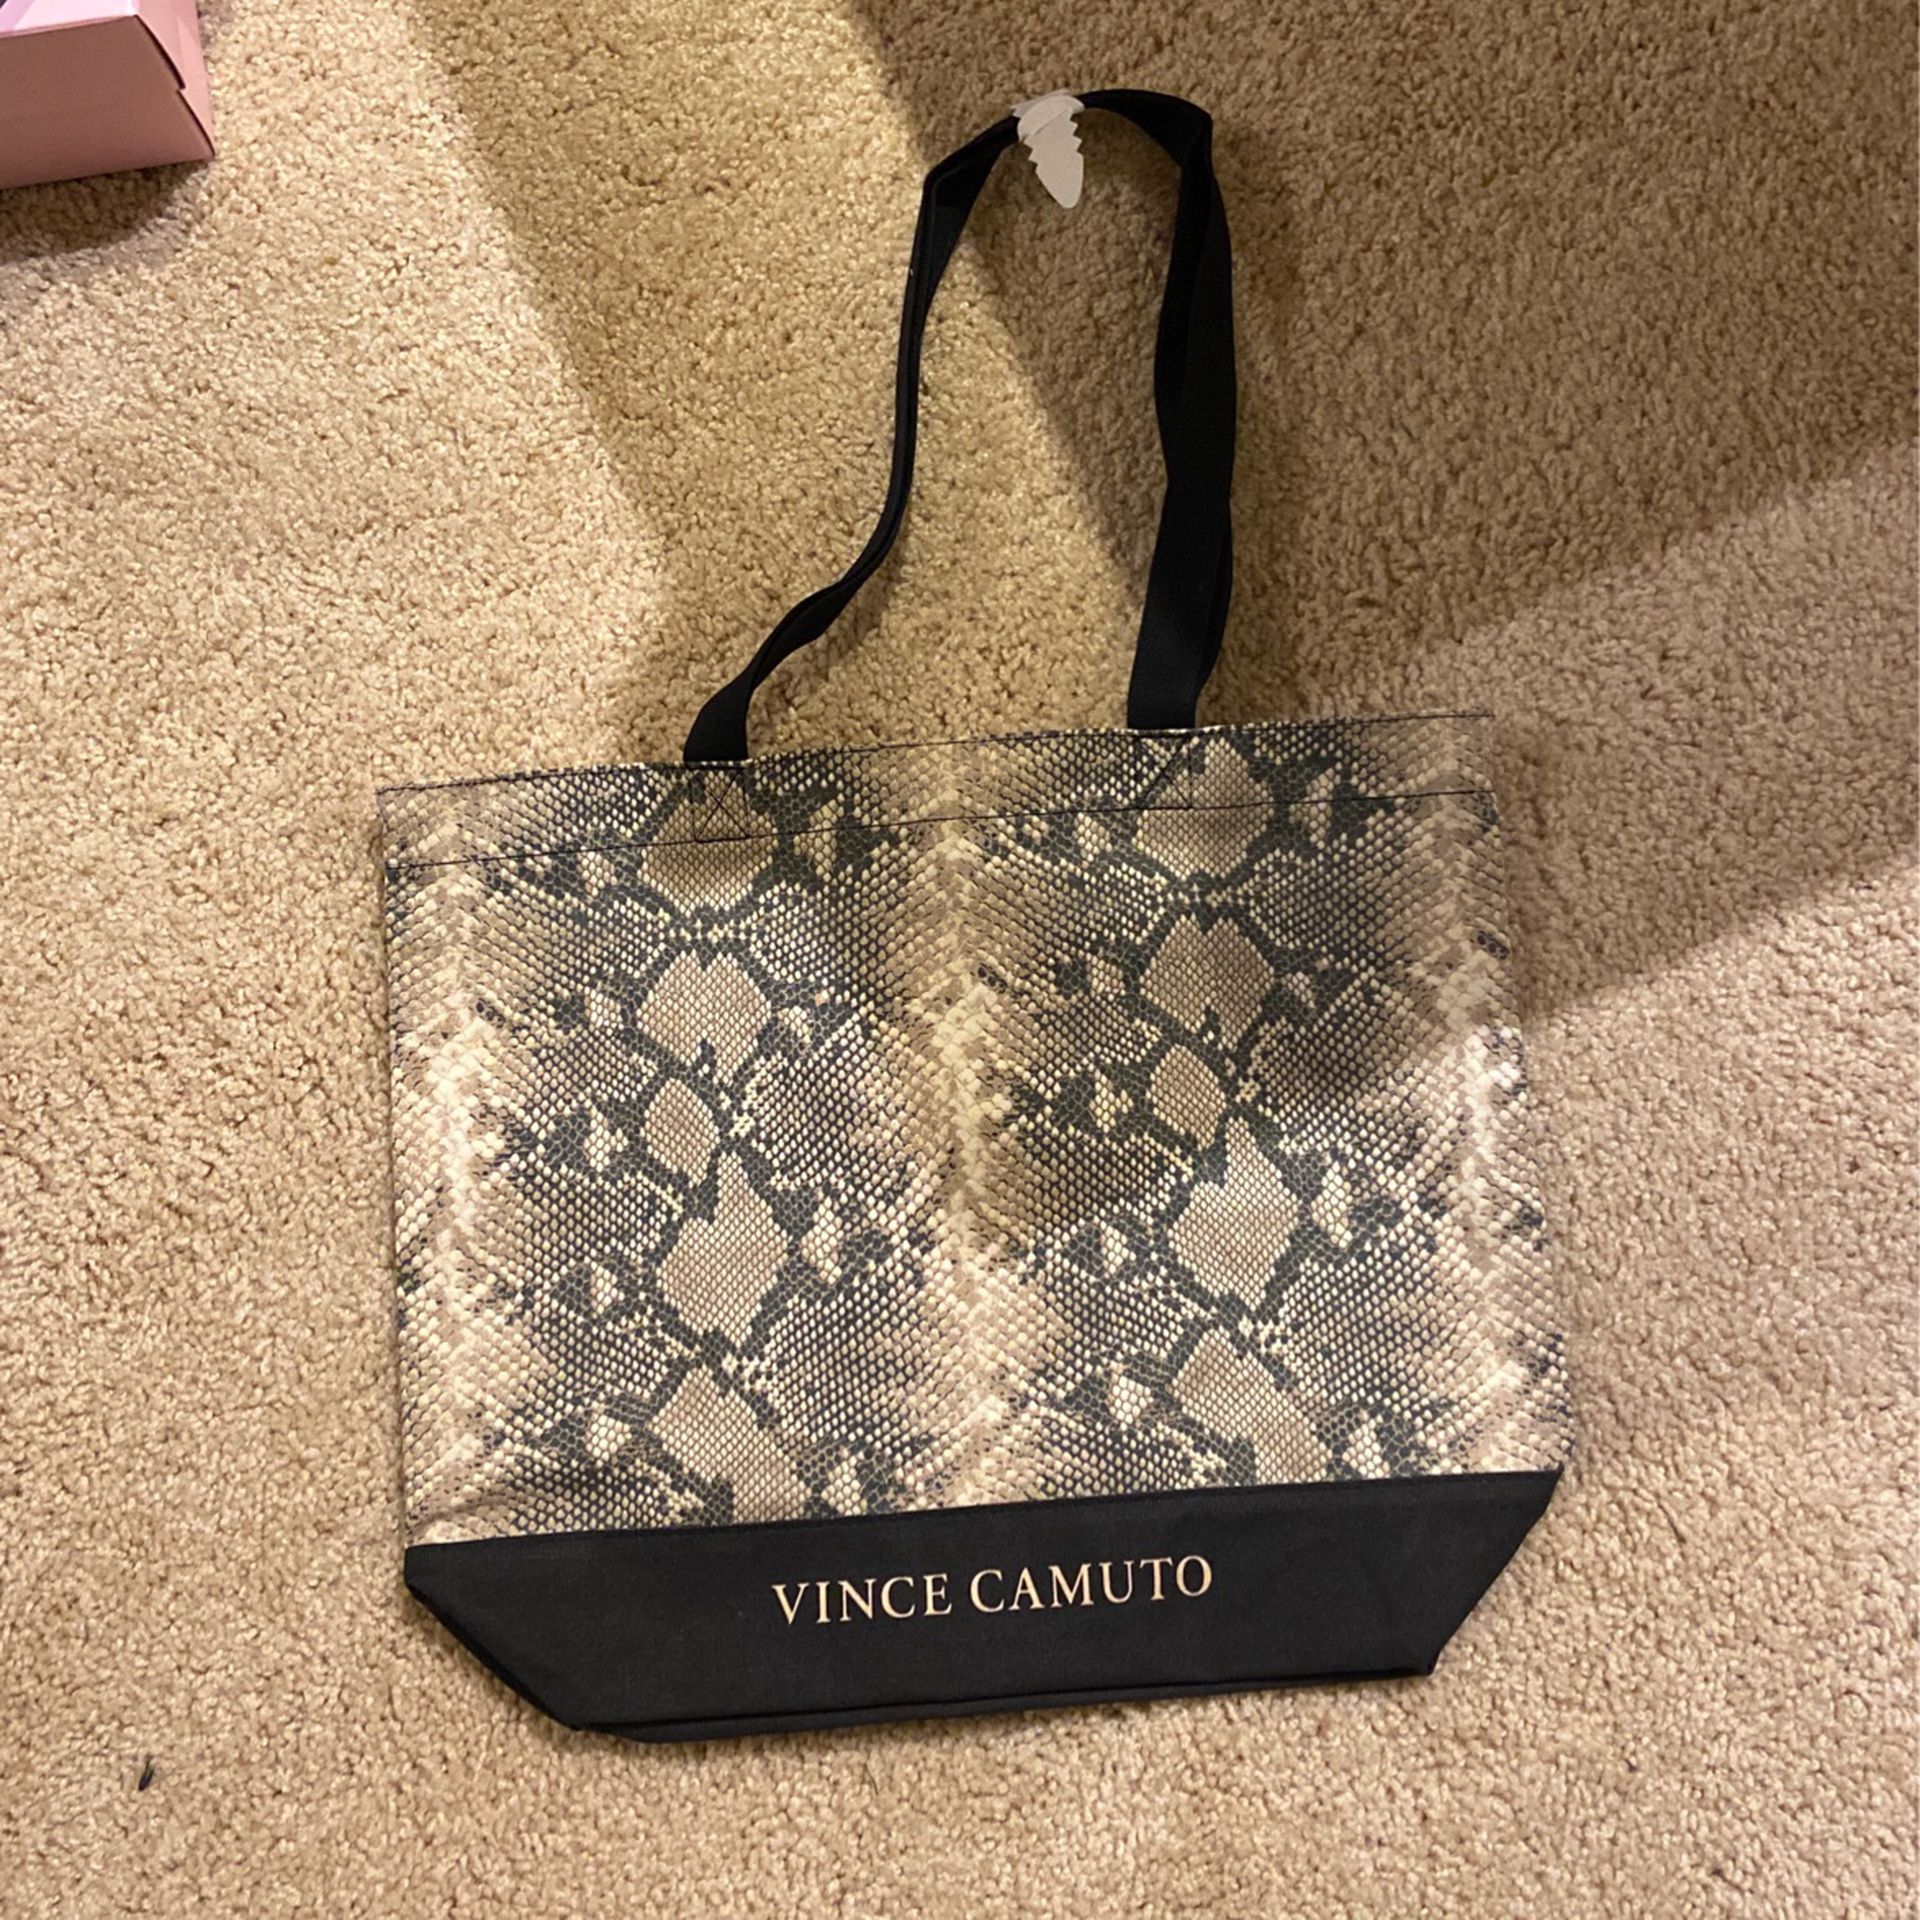 New Vince Camuto Tote